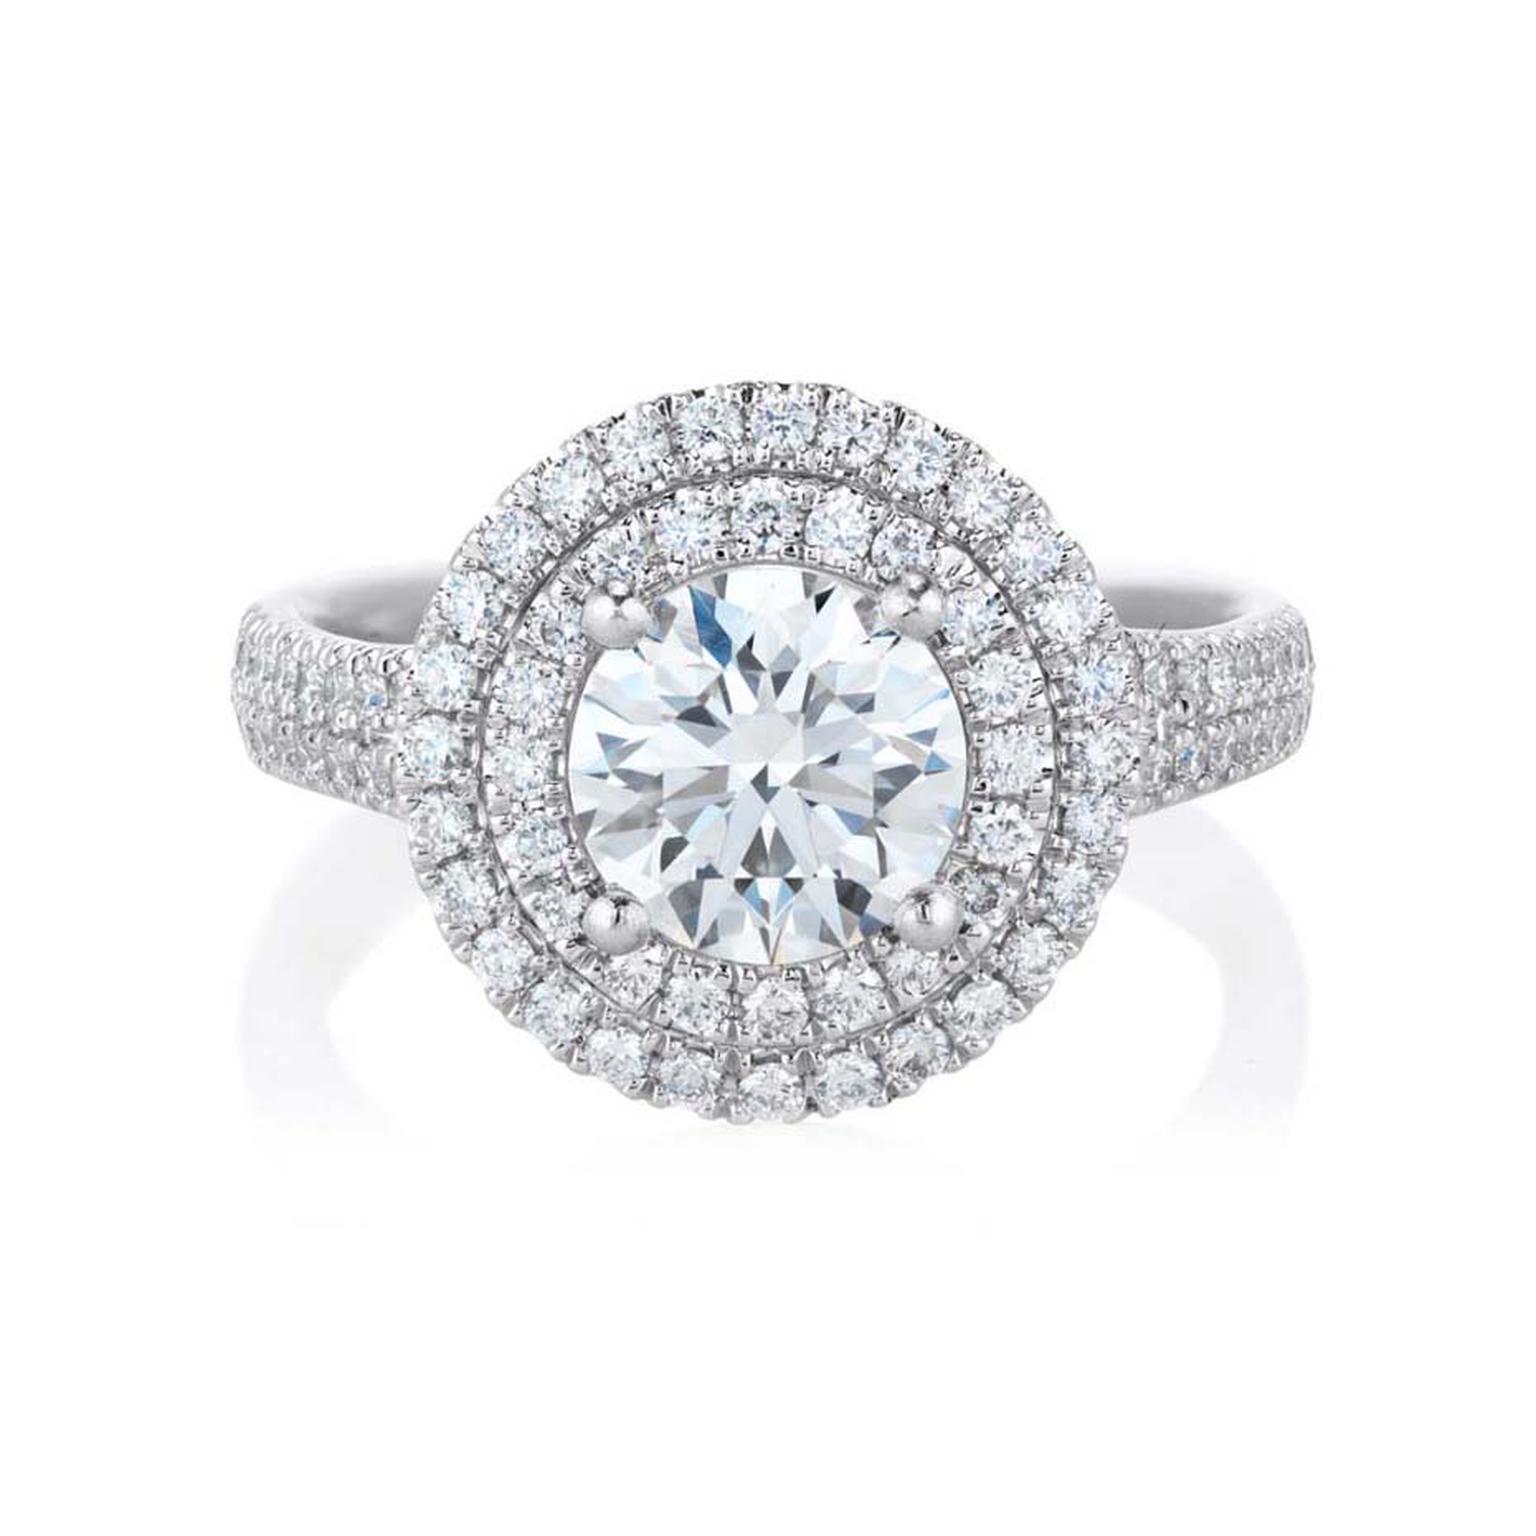 De Beers Aura Double Halo ring in platinum, set with a central round, brilliant-cut diamond and micro pavé diamonds.